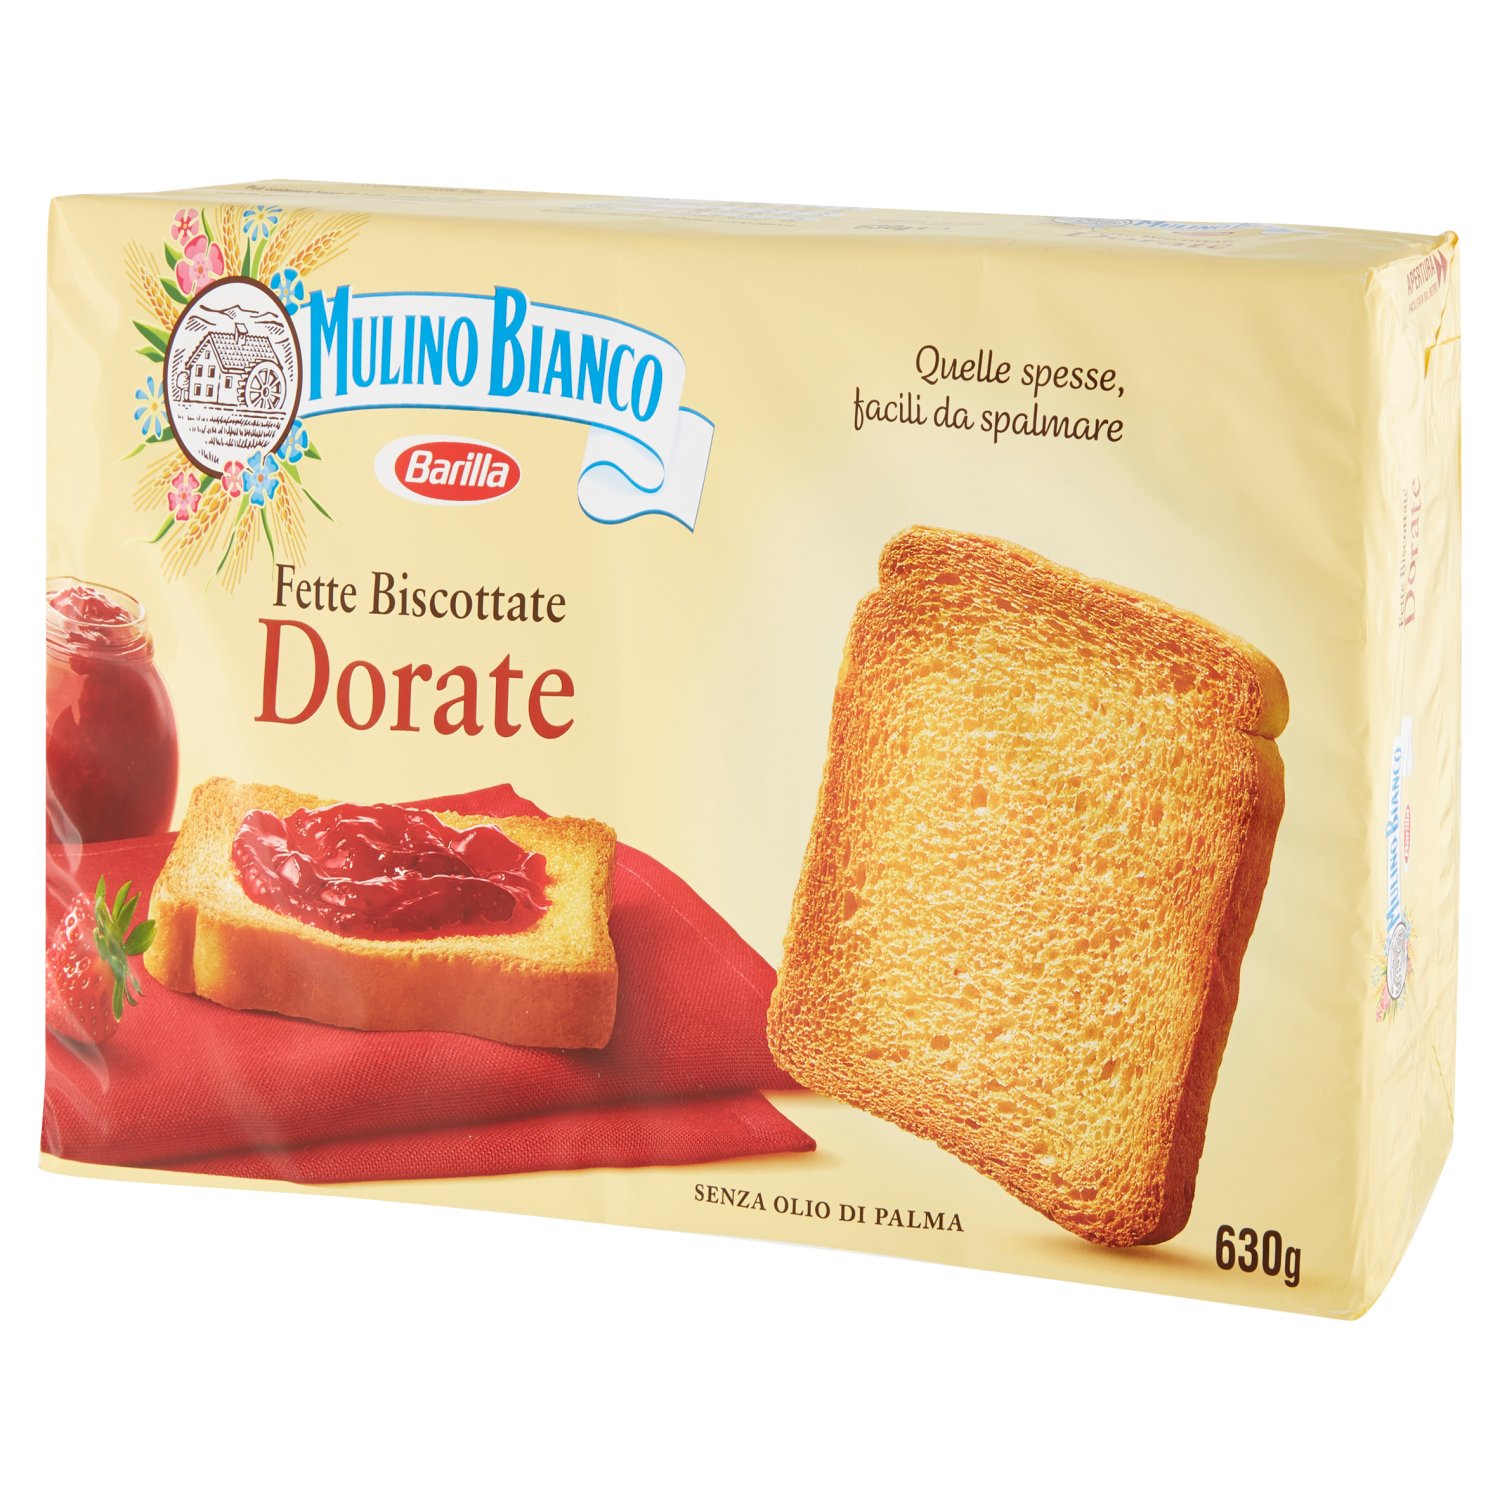 Mulino Bianco Fette Biscottate Le Dorate 72 Fette 630g - Rusks Golden -  Made In Italy